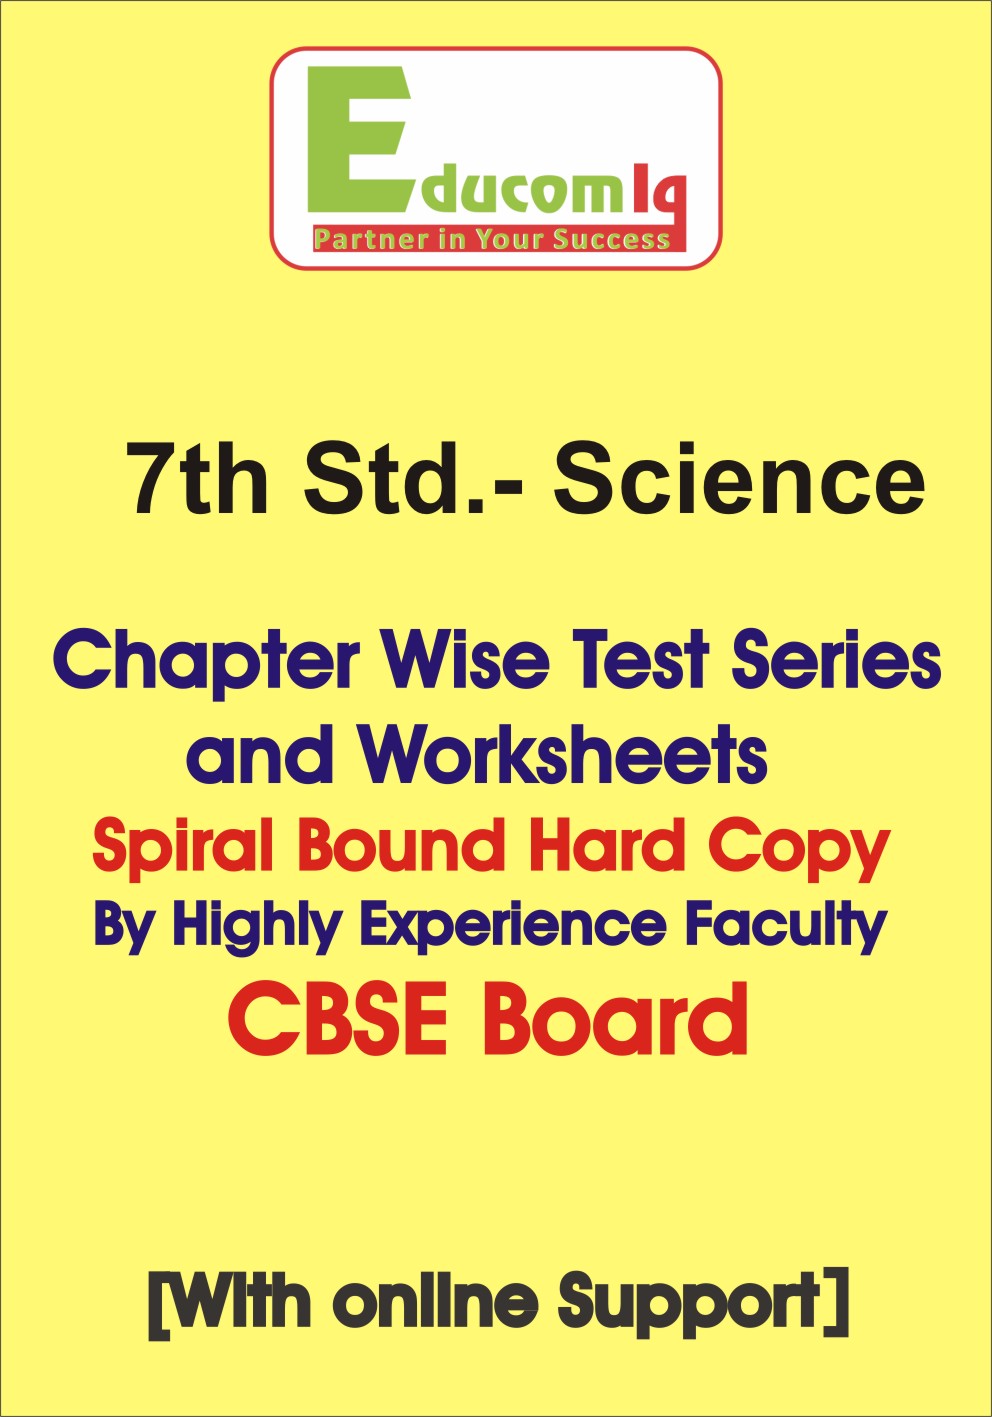 science-cbse-worksheet-7th-std-in-english-medium-with-answers